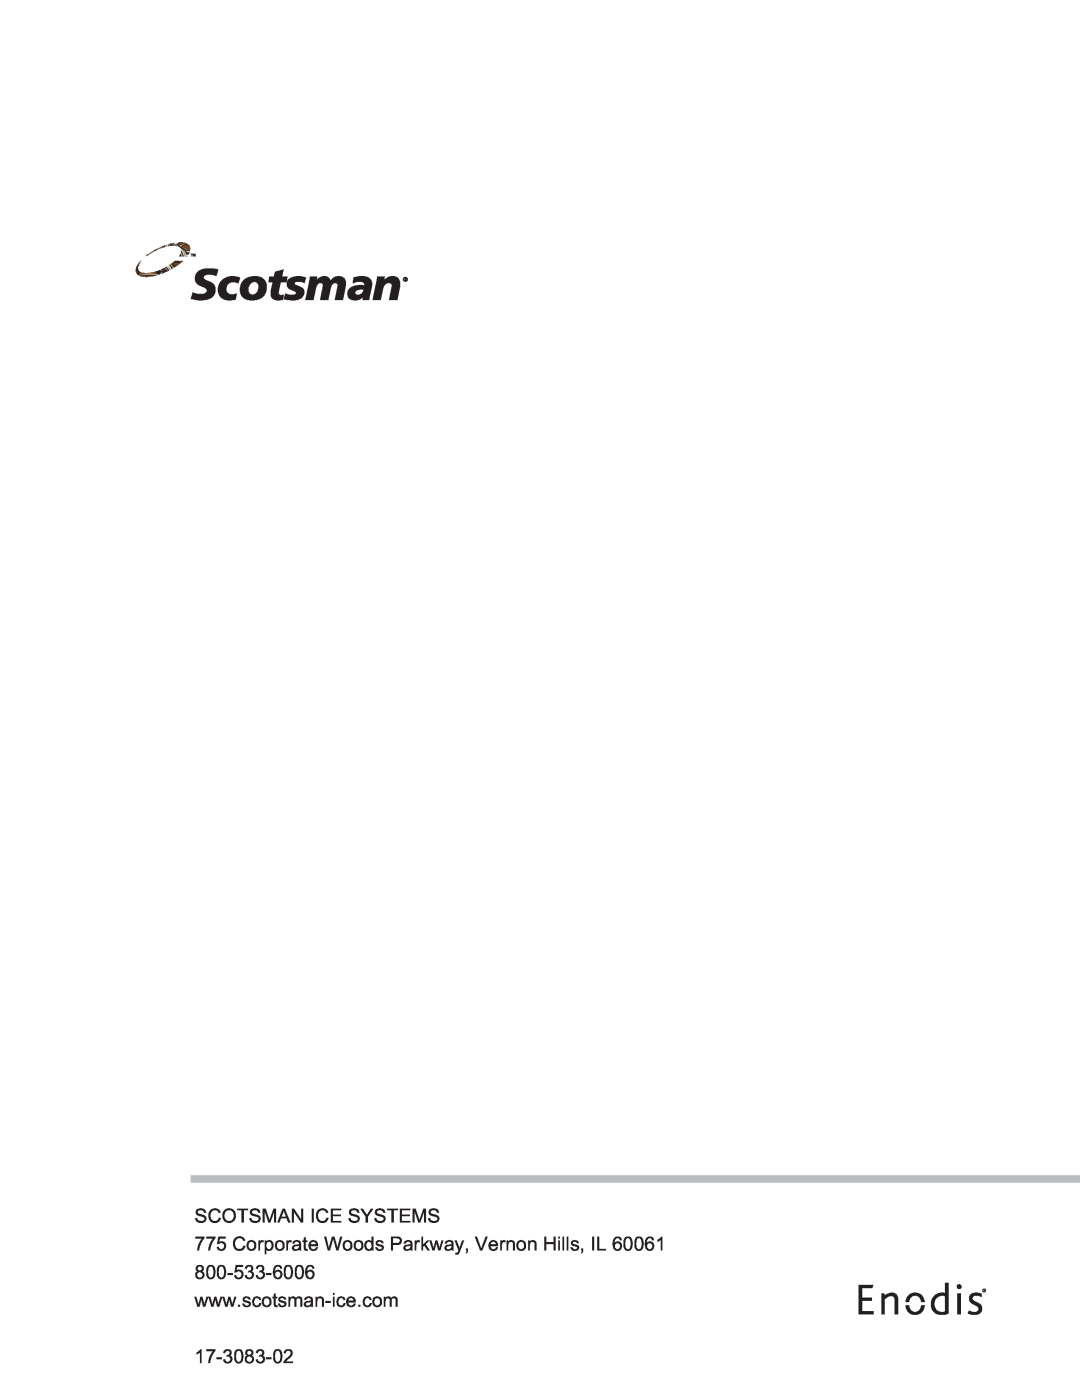 Scotsman Ice C2148W, C1448, C1848 user manual Scotsman Ice Systems, Corporate Woods Parkway, Vernon Hills, IL, 17-3083-02 